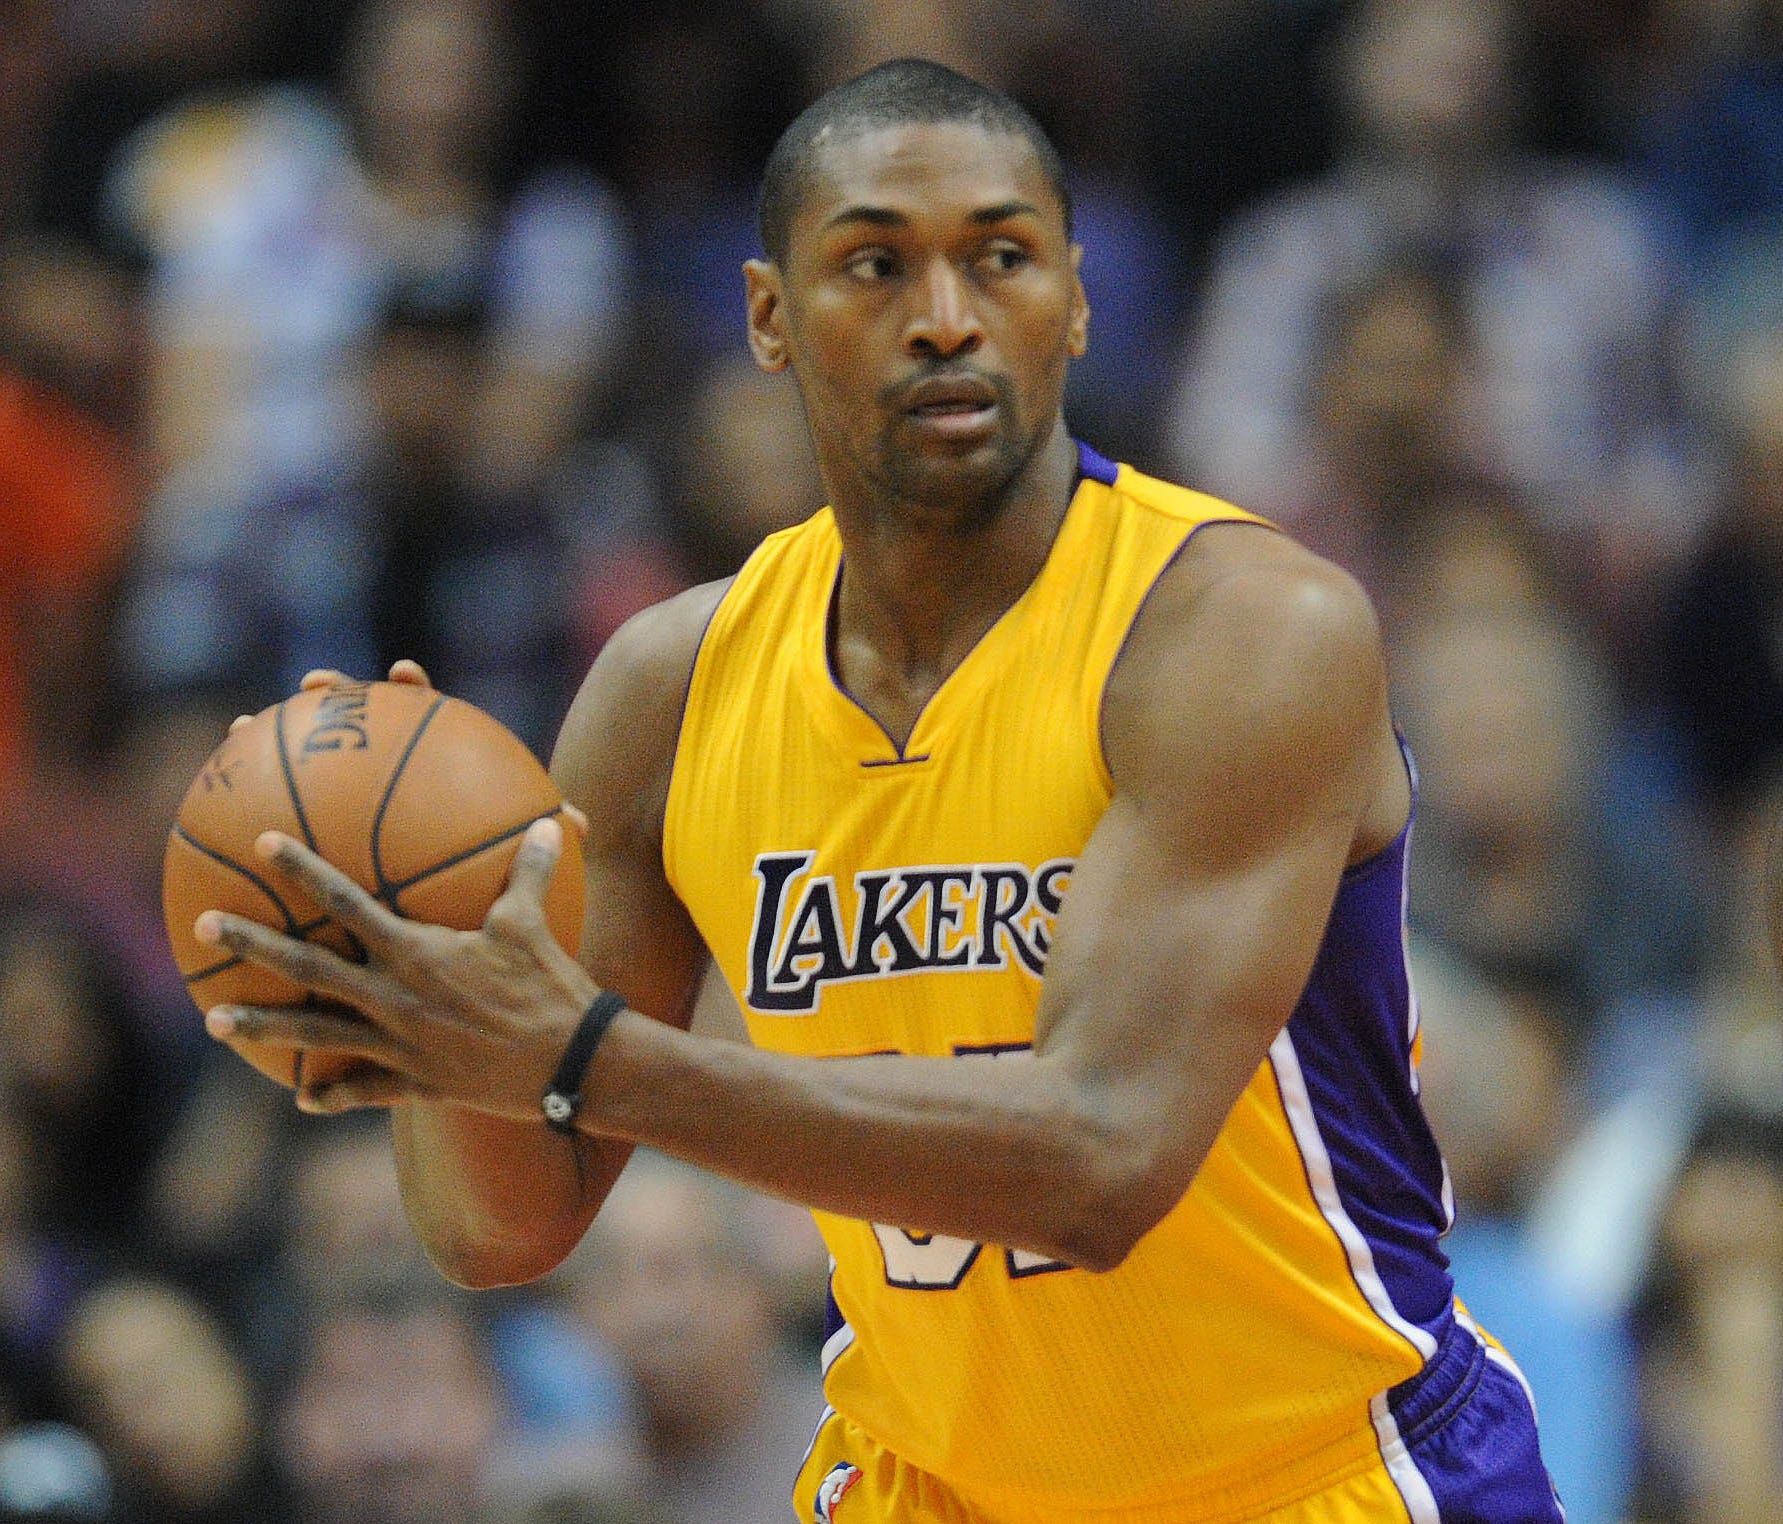 Metta World Peace last played in the NBA during the 2016-17 season.